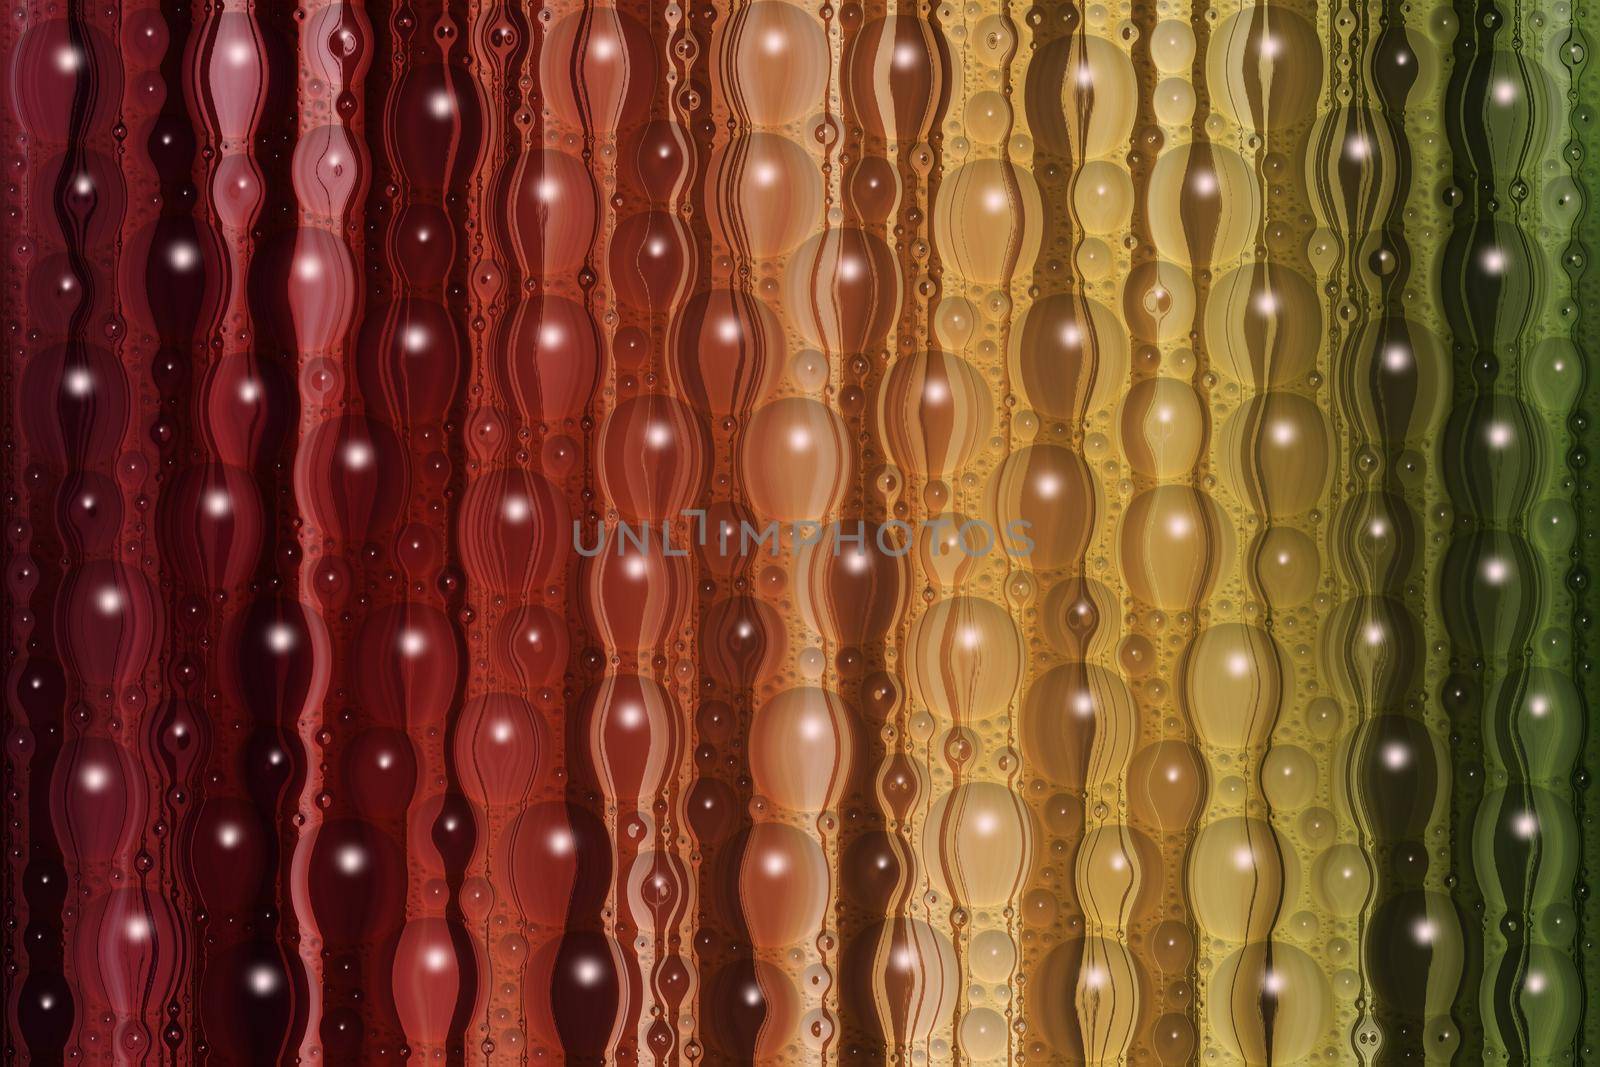 Multicolored vertical lines with water drops, bright abstract background by Bezdnatm